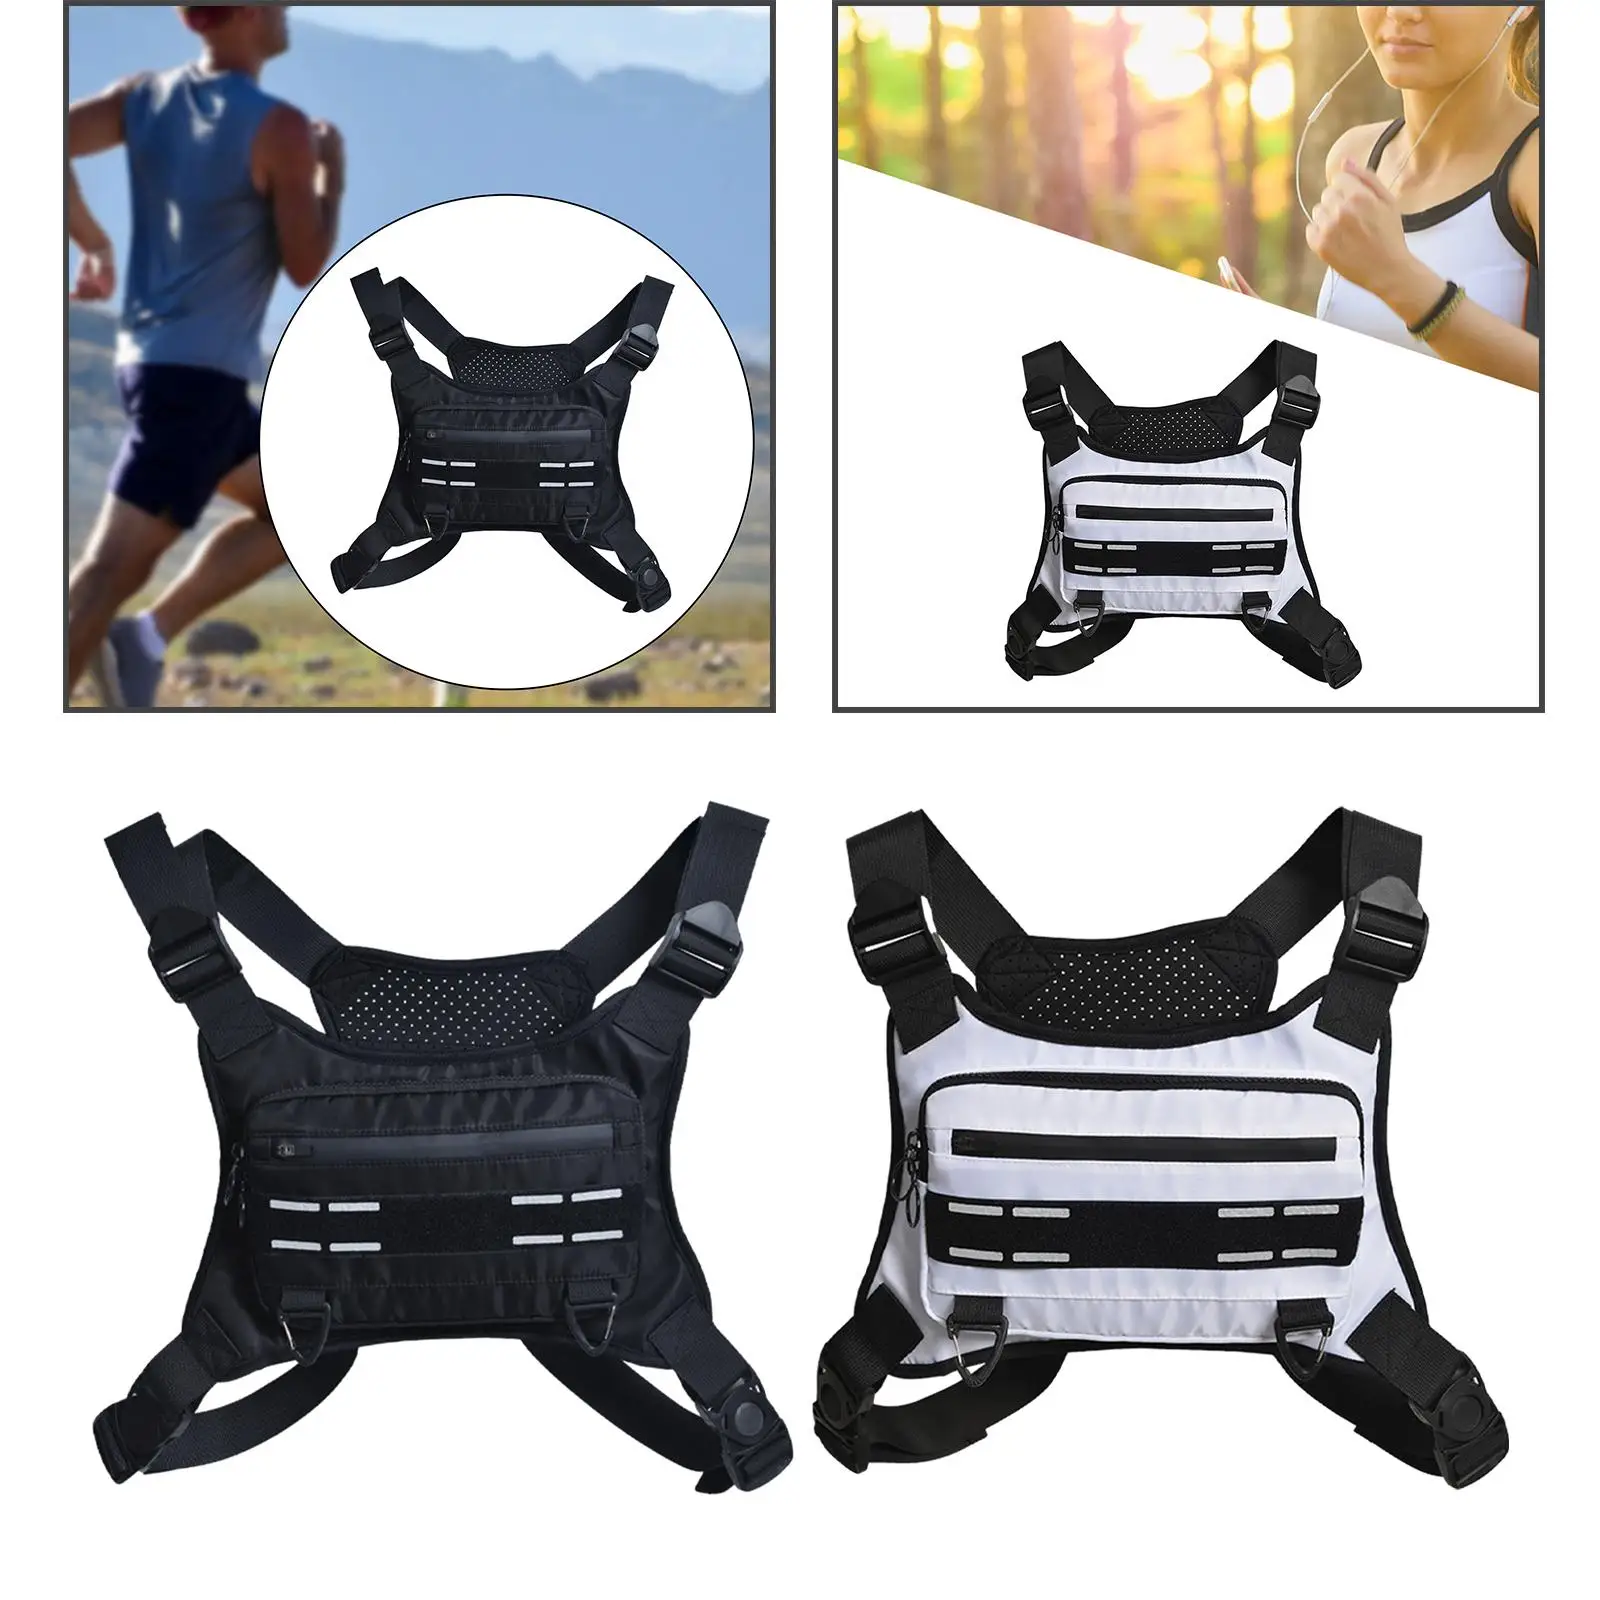 Chest Rig Bag Adult with Adjustable Shoulder Straps Harness Vest Pouch Chest Backpack for Hunting Sports Climbing Hiking Travel